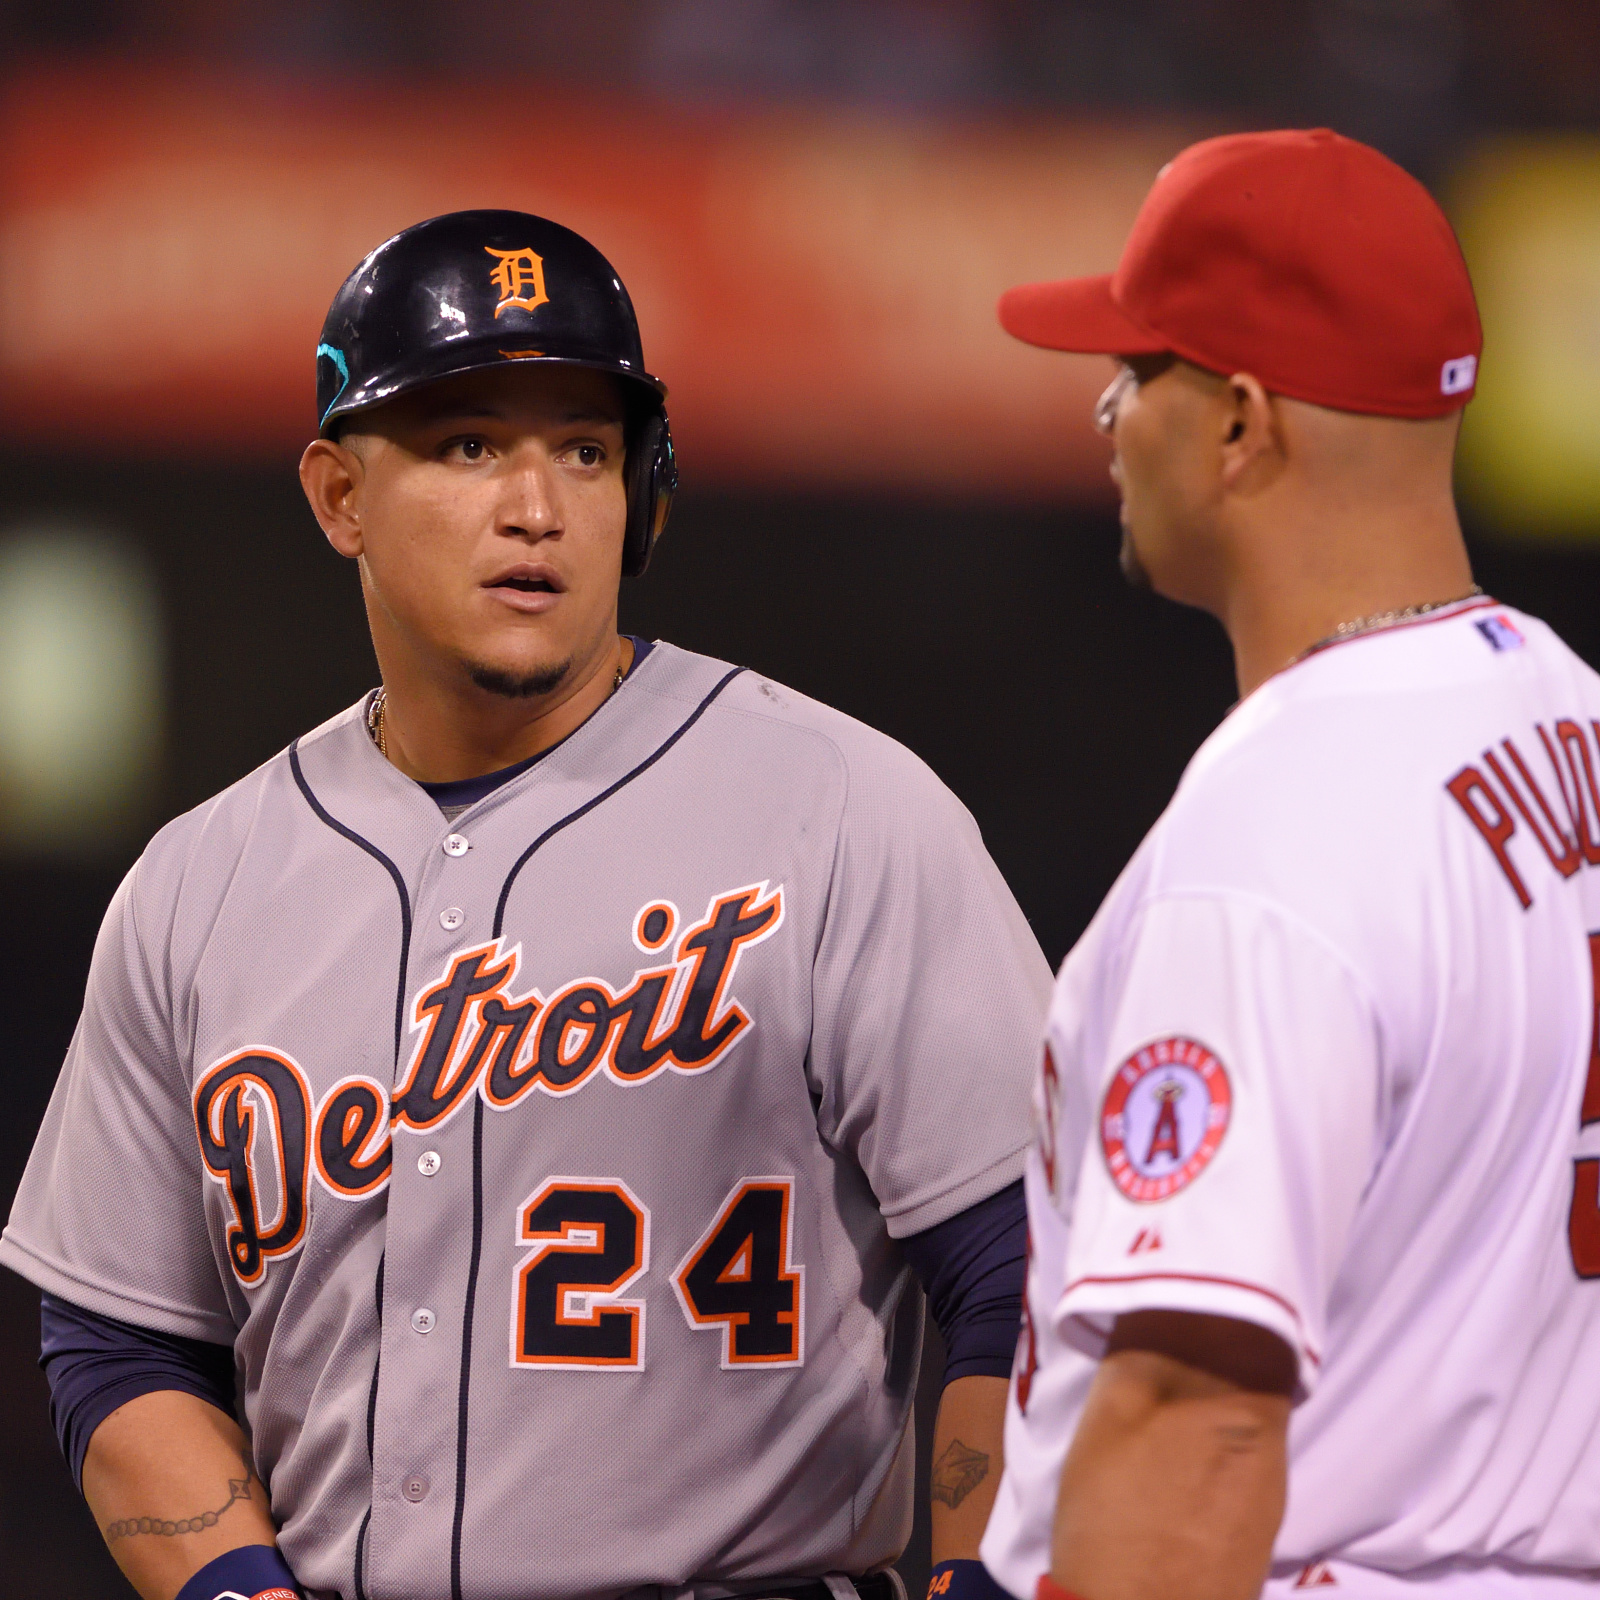 Cardinals' Albert Pujols and Tigers' Miguel Cabrera play in their final All- Star Game, Flippin' Bats